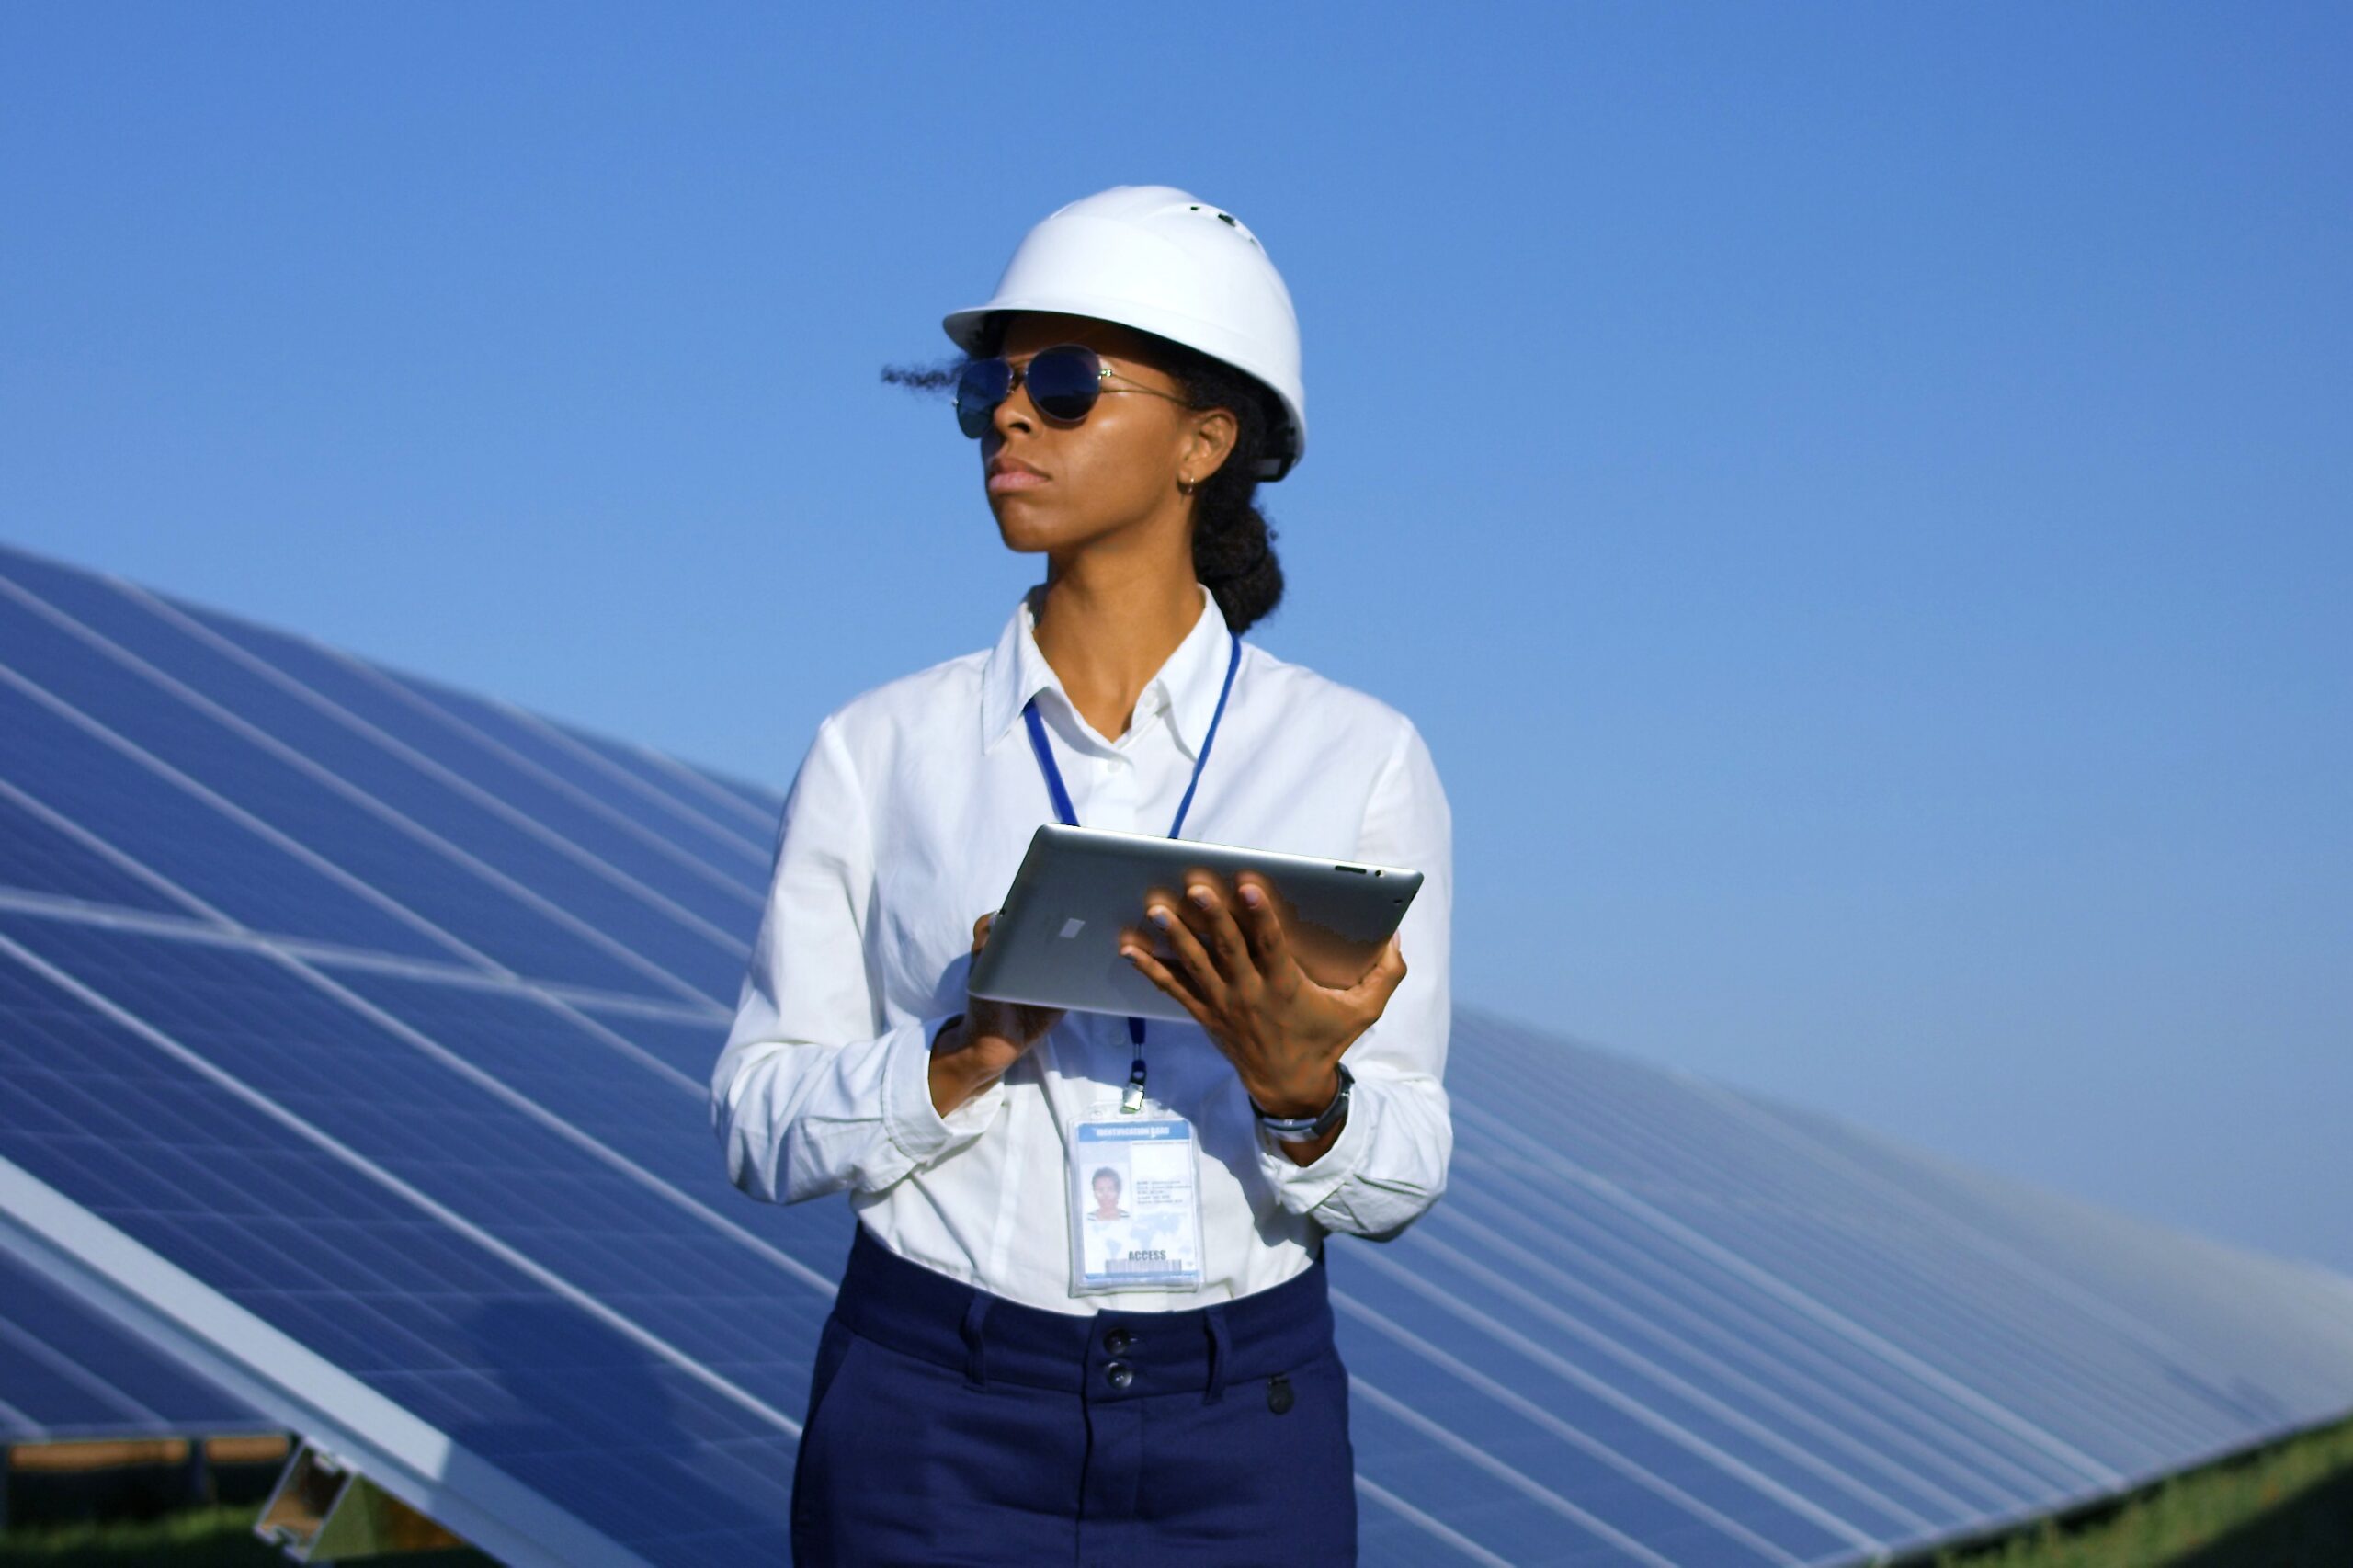 stock photo of a female engineer standing with a tablet in front of solar panels